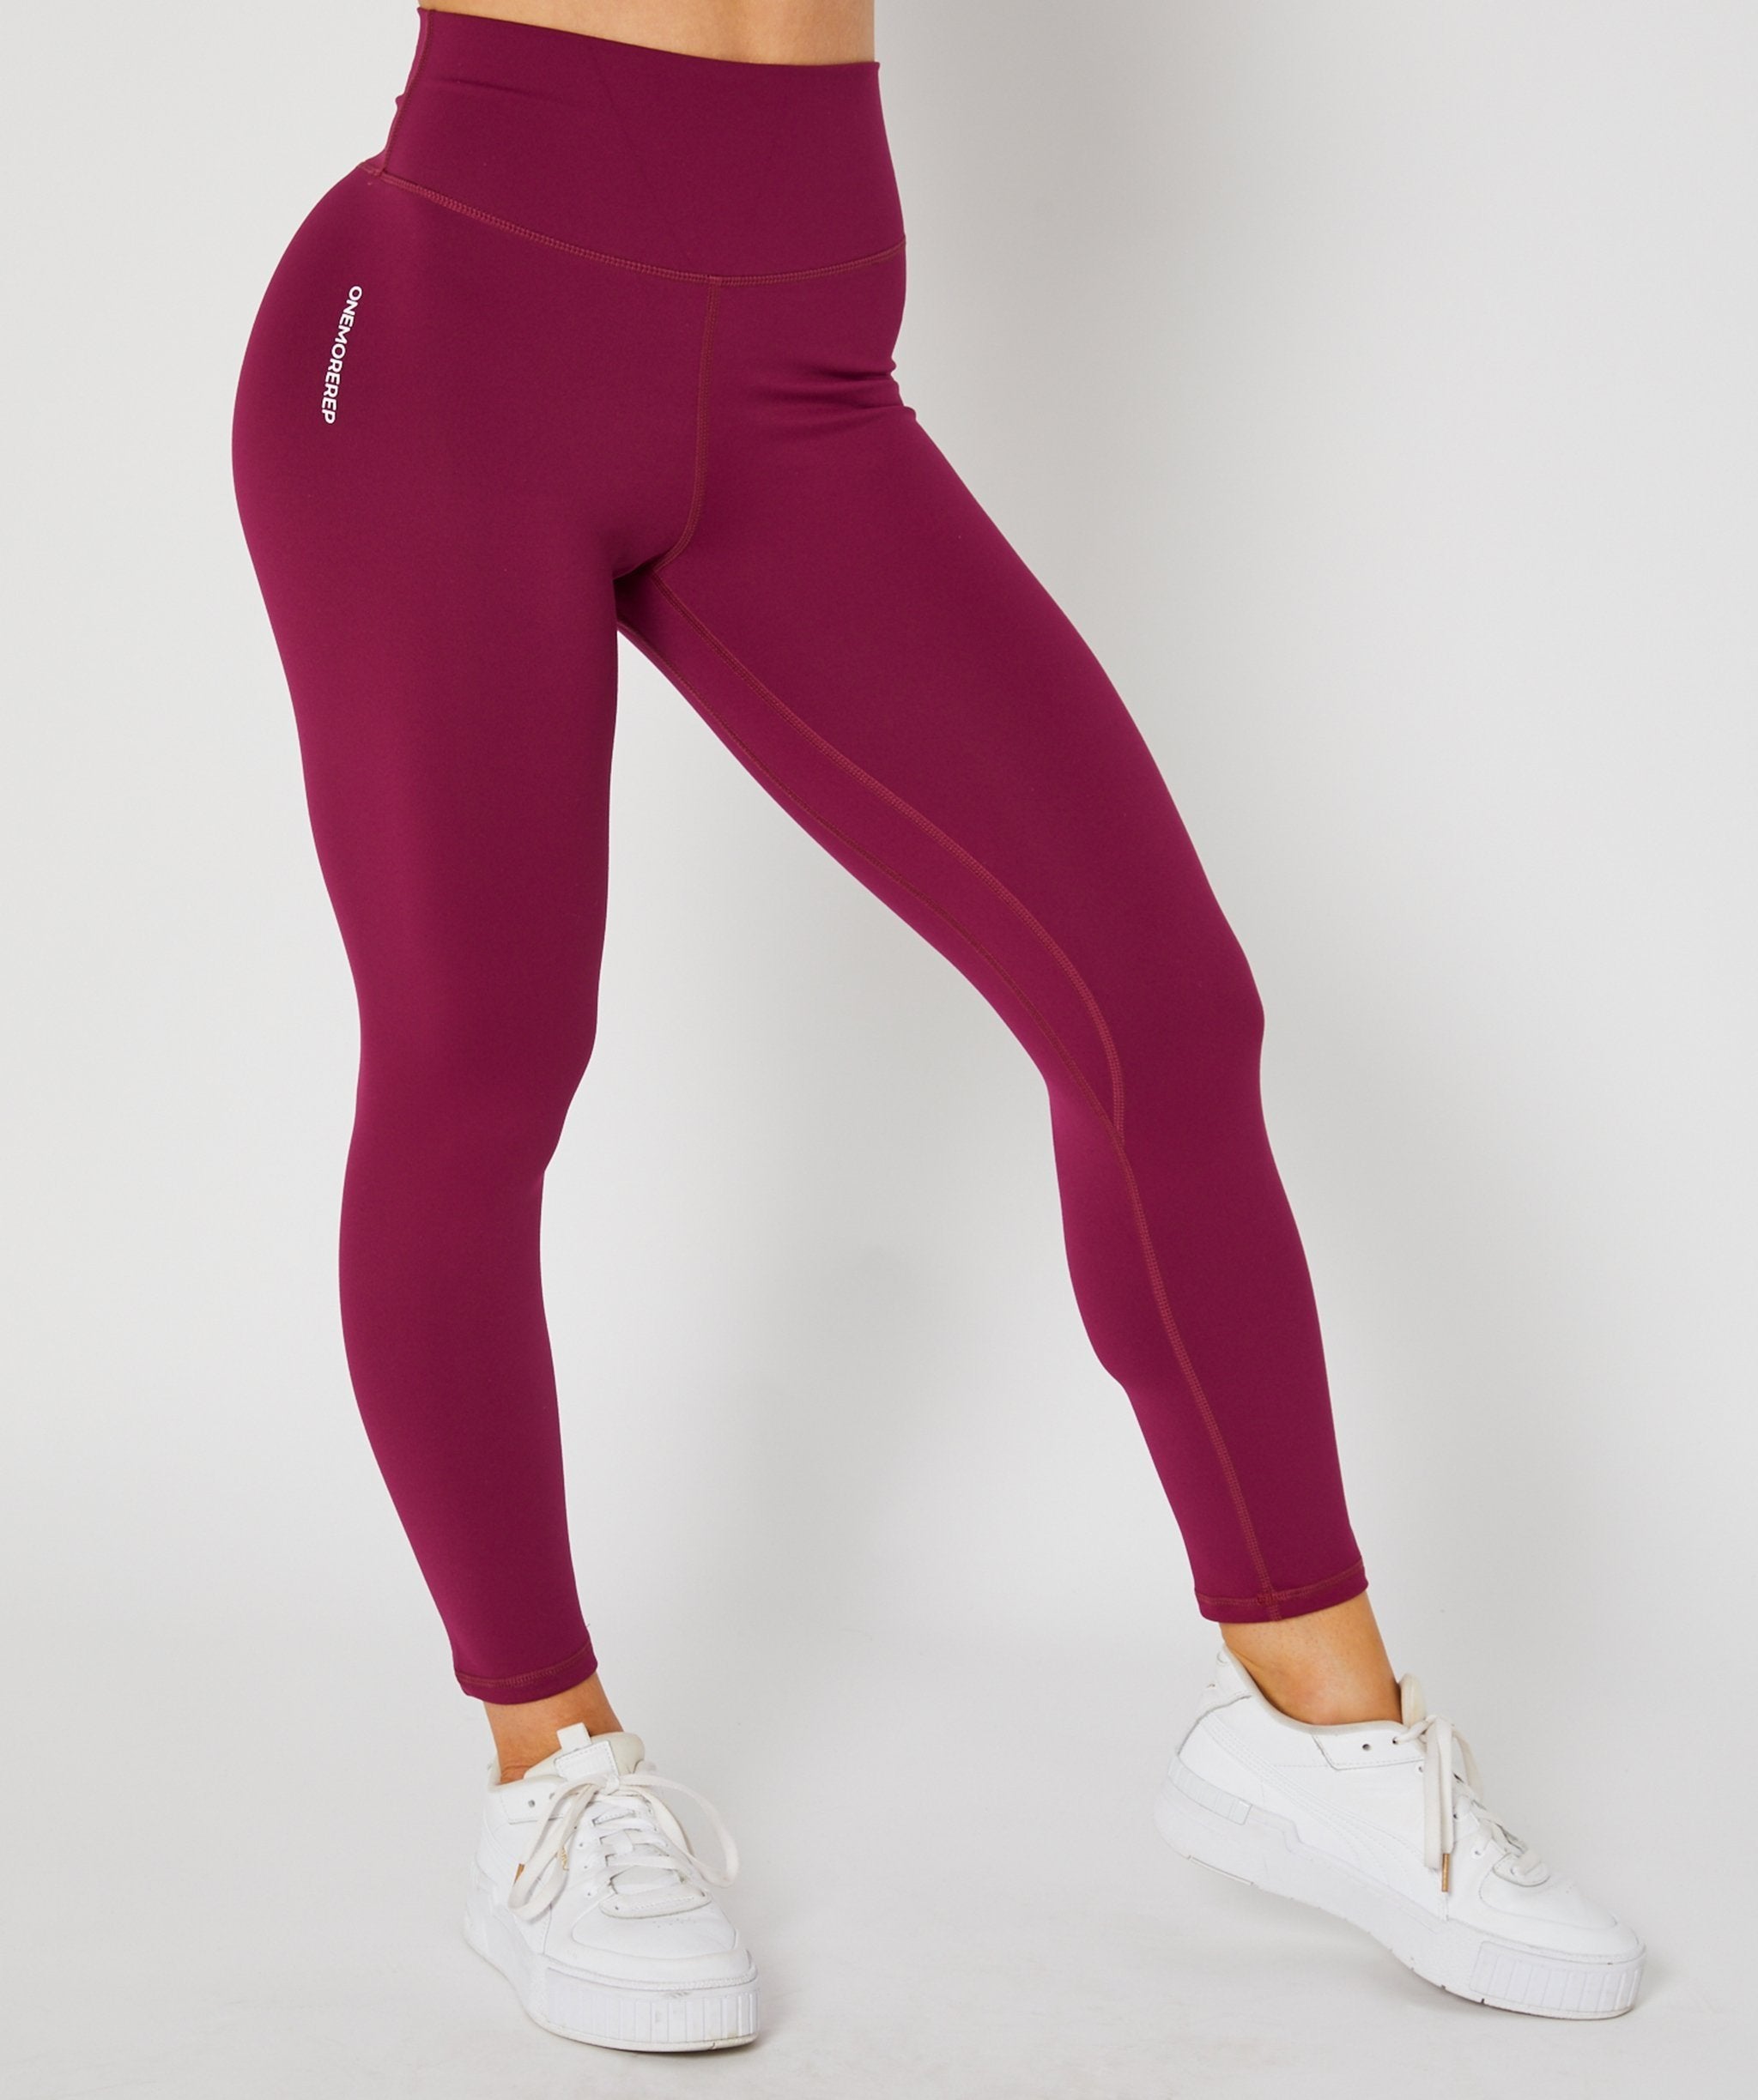 Image of Core Leggings - 7/8 Length (Berry) by OneMoreRep